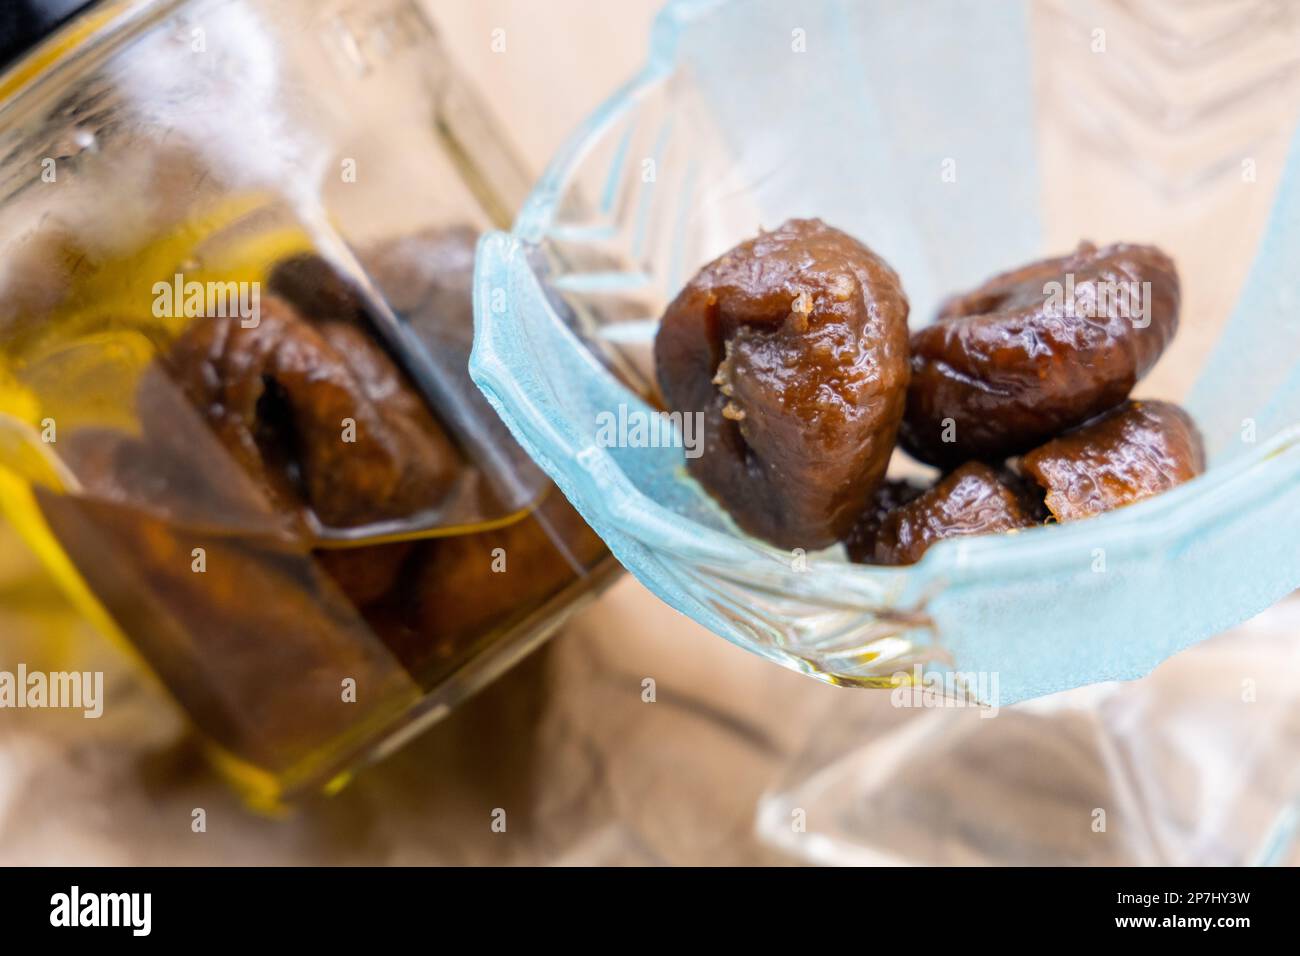 Figs Soaked in Olive Oil - High Health Benefits  -Fig plant is one of the fruits mentioned in the Quran, along with olives - Islamic Medicine Stock Photo